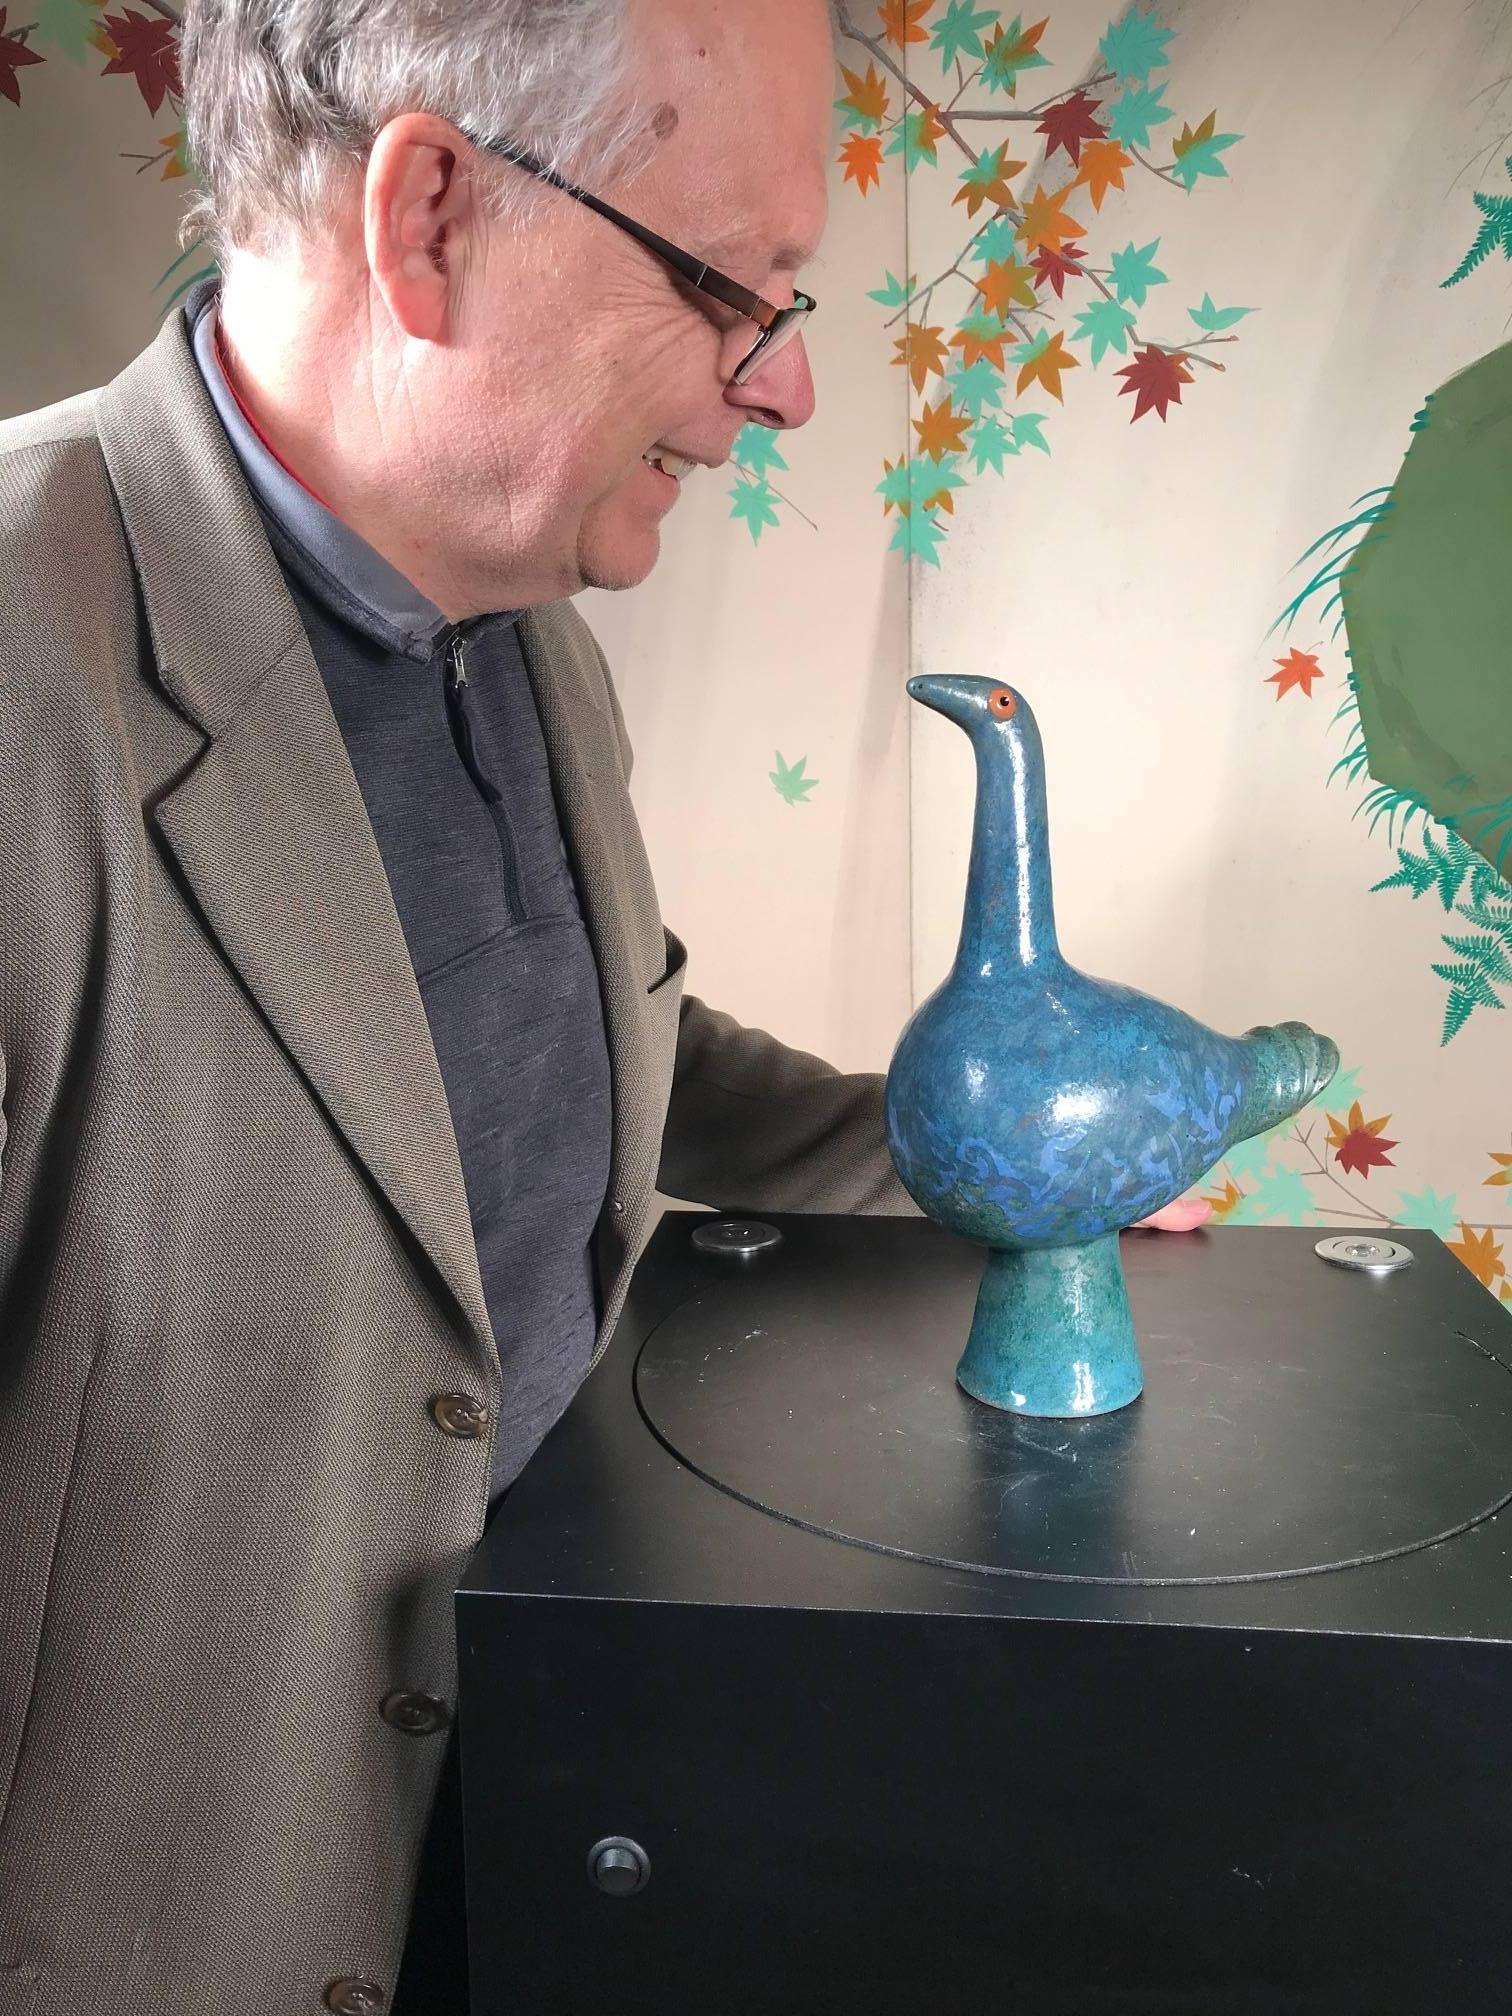 A whimsical blue bird sculpture master work designed and hand-painted by Eva Fritz-Lindner, (1933-2017)

This is a creative handmade, hand-painted and hand glazed blue glazed bird. It was designed and hand-painted by the now deceased master